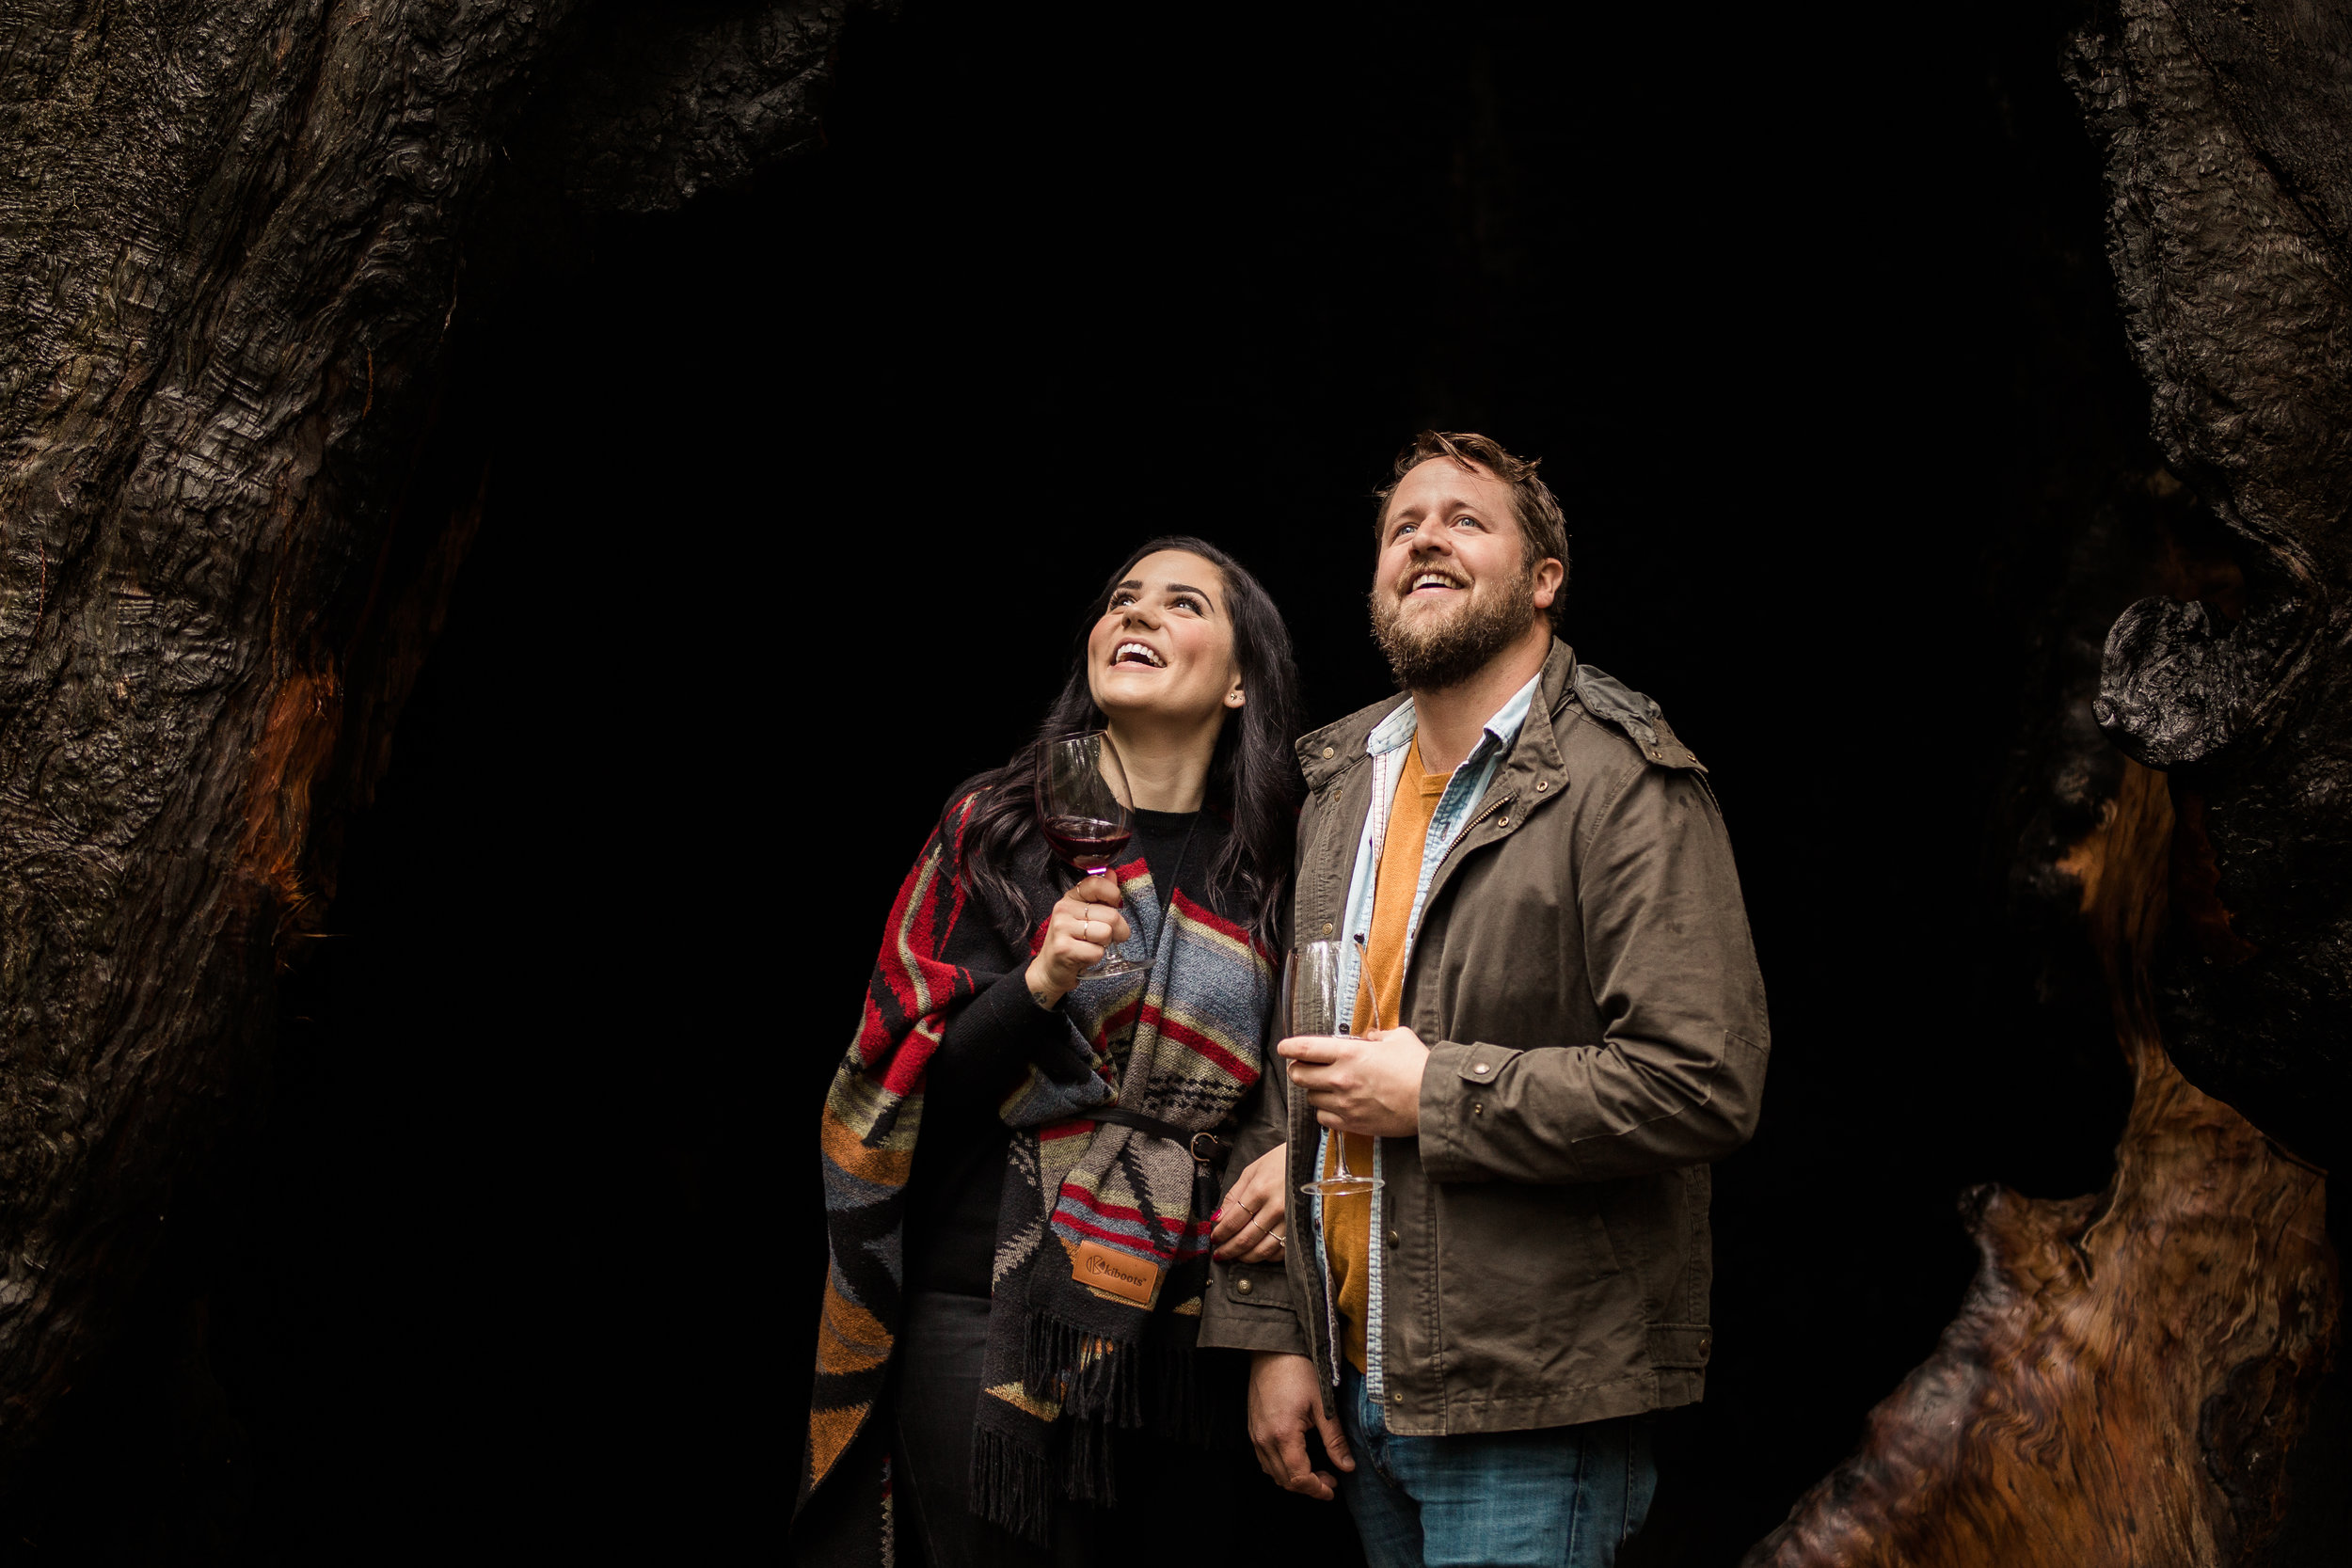 nicole-daacke-photography-redwoods-national-park-forest-rainy-foggy-adventure-engagement-session-humboldt-county-old-growth-redwood-tree-elopement-intimate-wedding-photographer-7.jpg